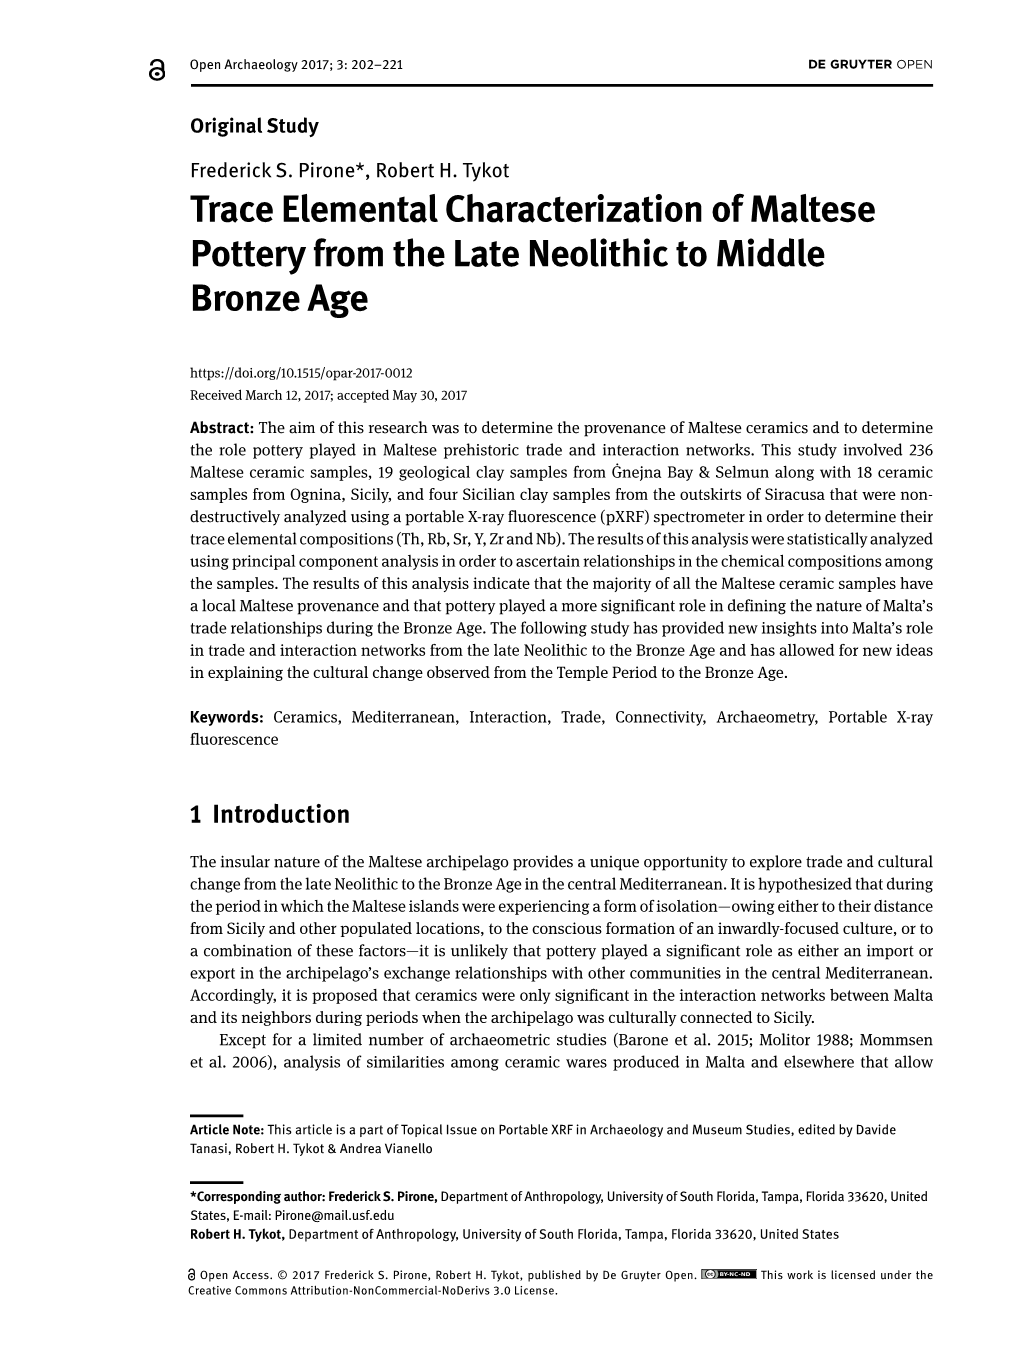 Trace Elemental Characterization of Maltese Pottery from the Late Neolithic to Middle Bronze Age